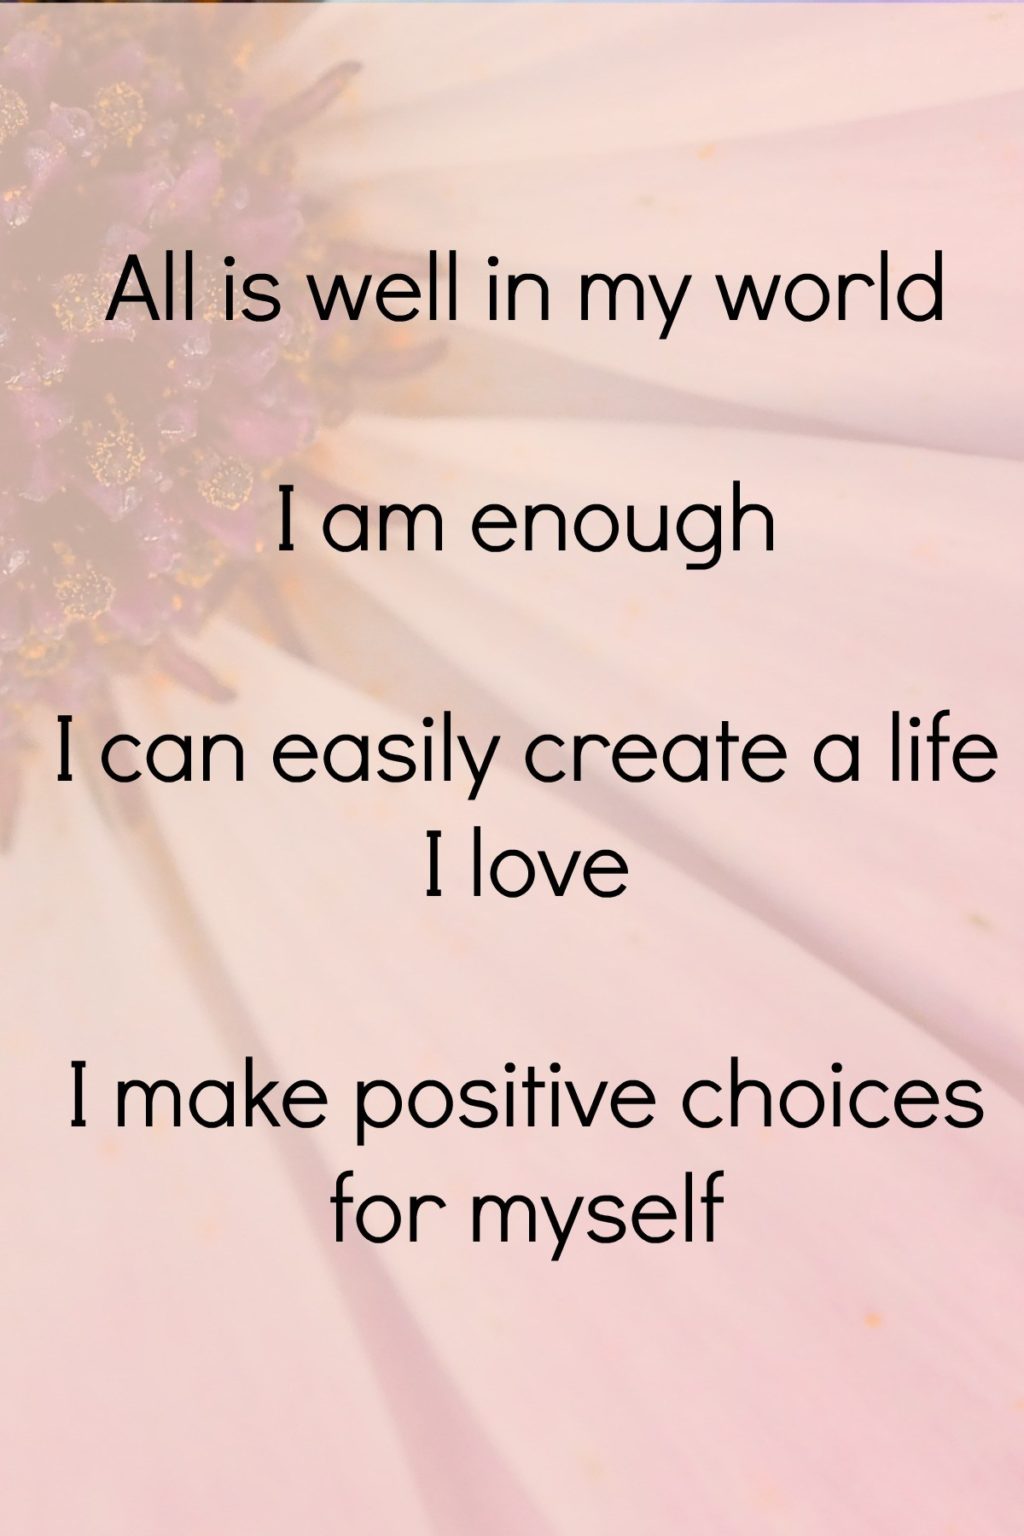 These goal setting positive affirmations will give you positive messages for the day. #affirmation #goalsetting #goals #goaldigger #success #personaldevelopment #inspiration